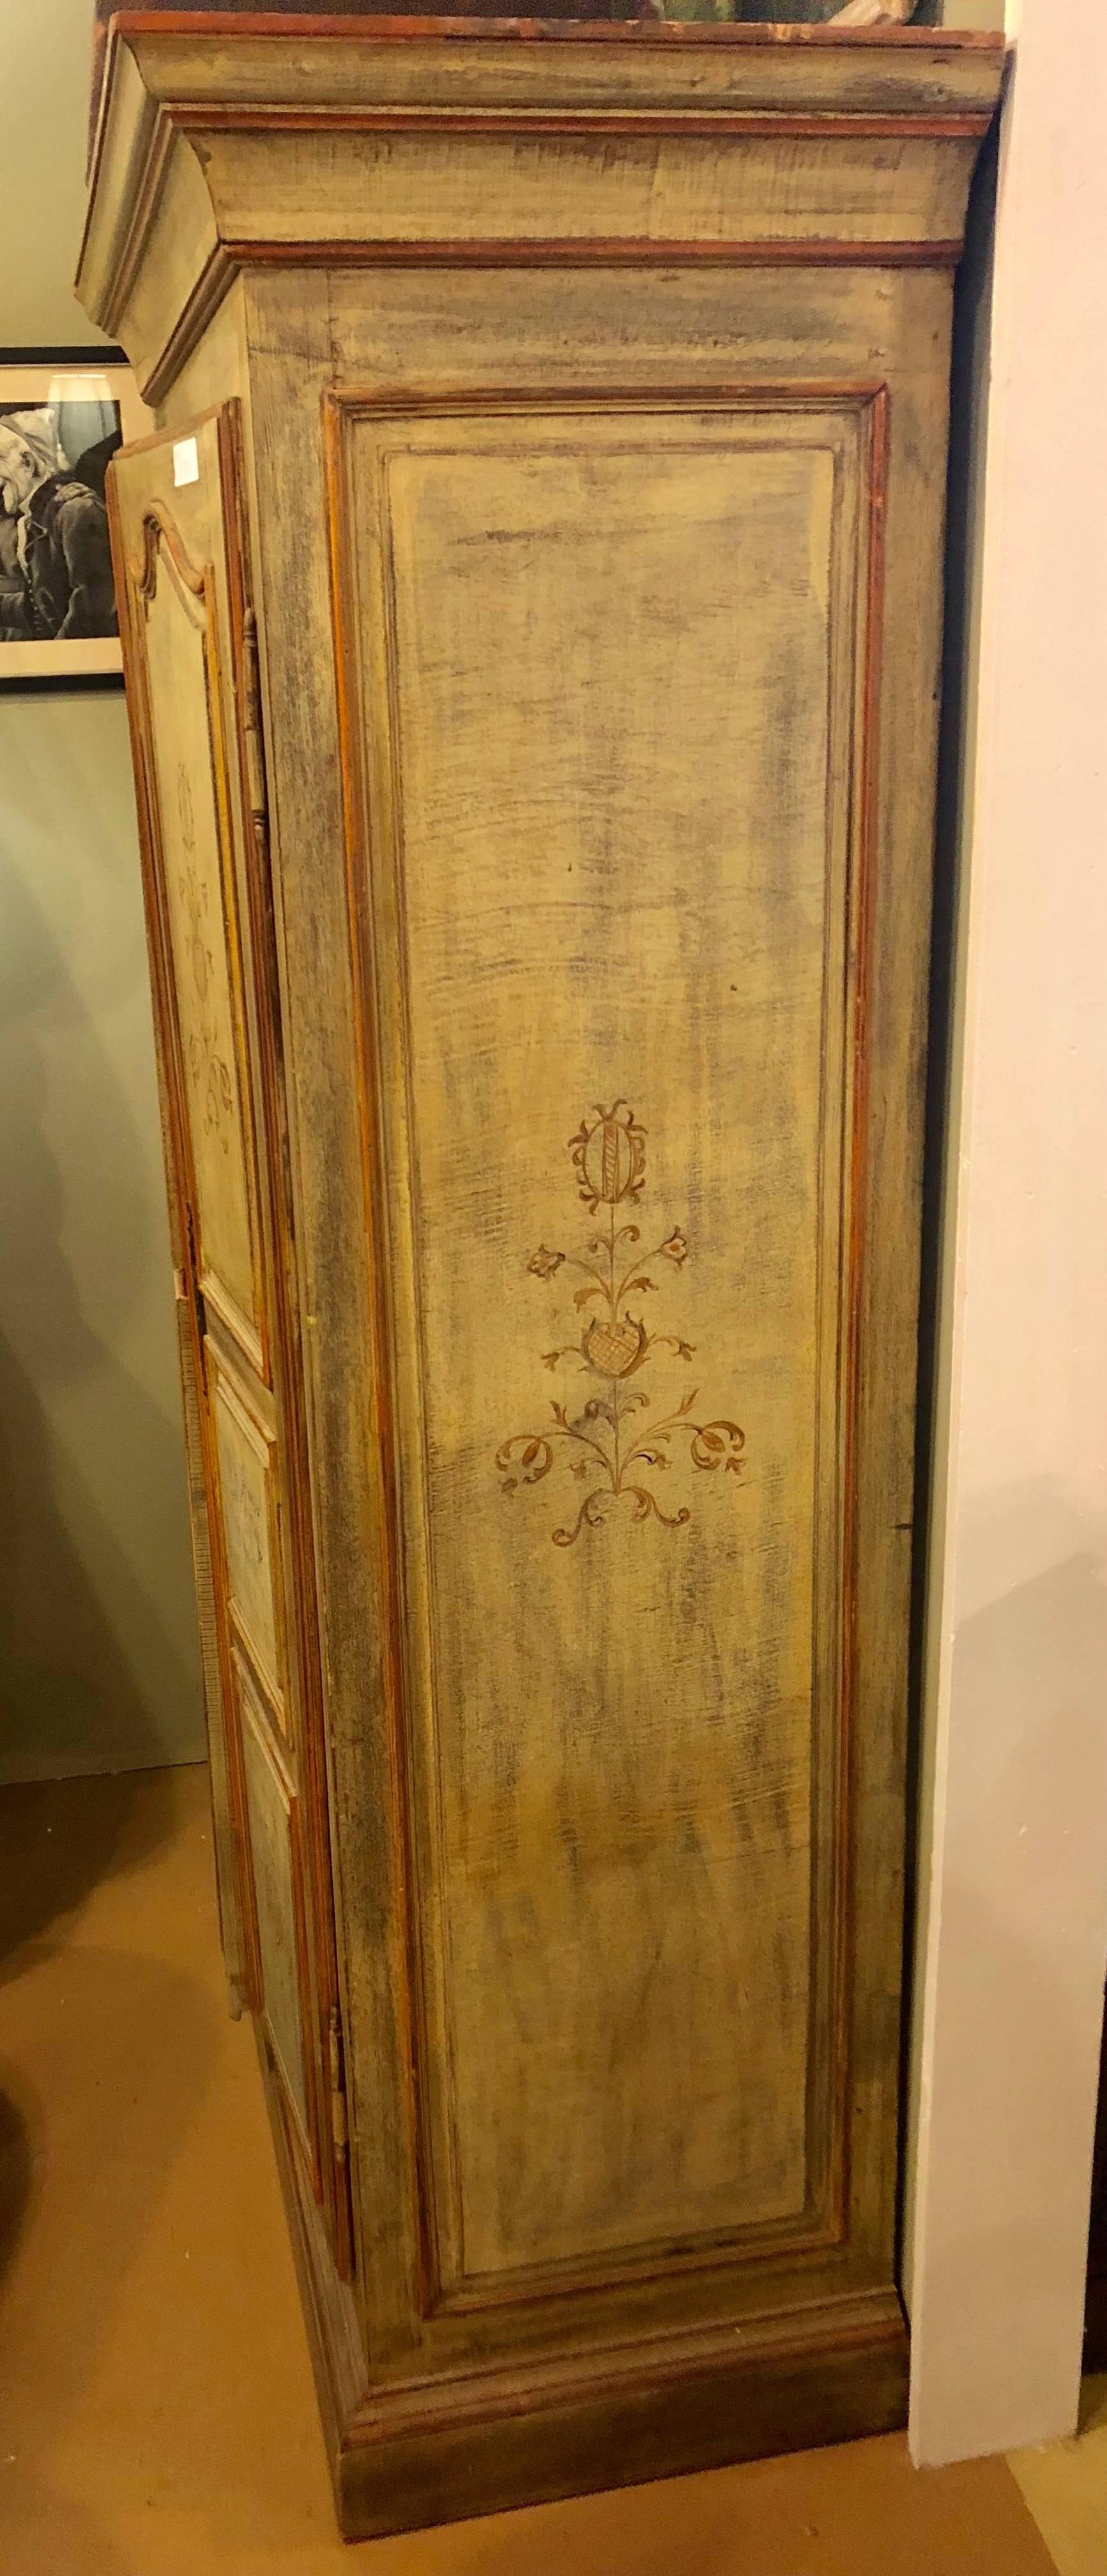 An Italian paint decorated cabinet, armoire or wardrobe. Having two doors leading to a large open shelved (missing shelves) interior.